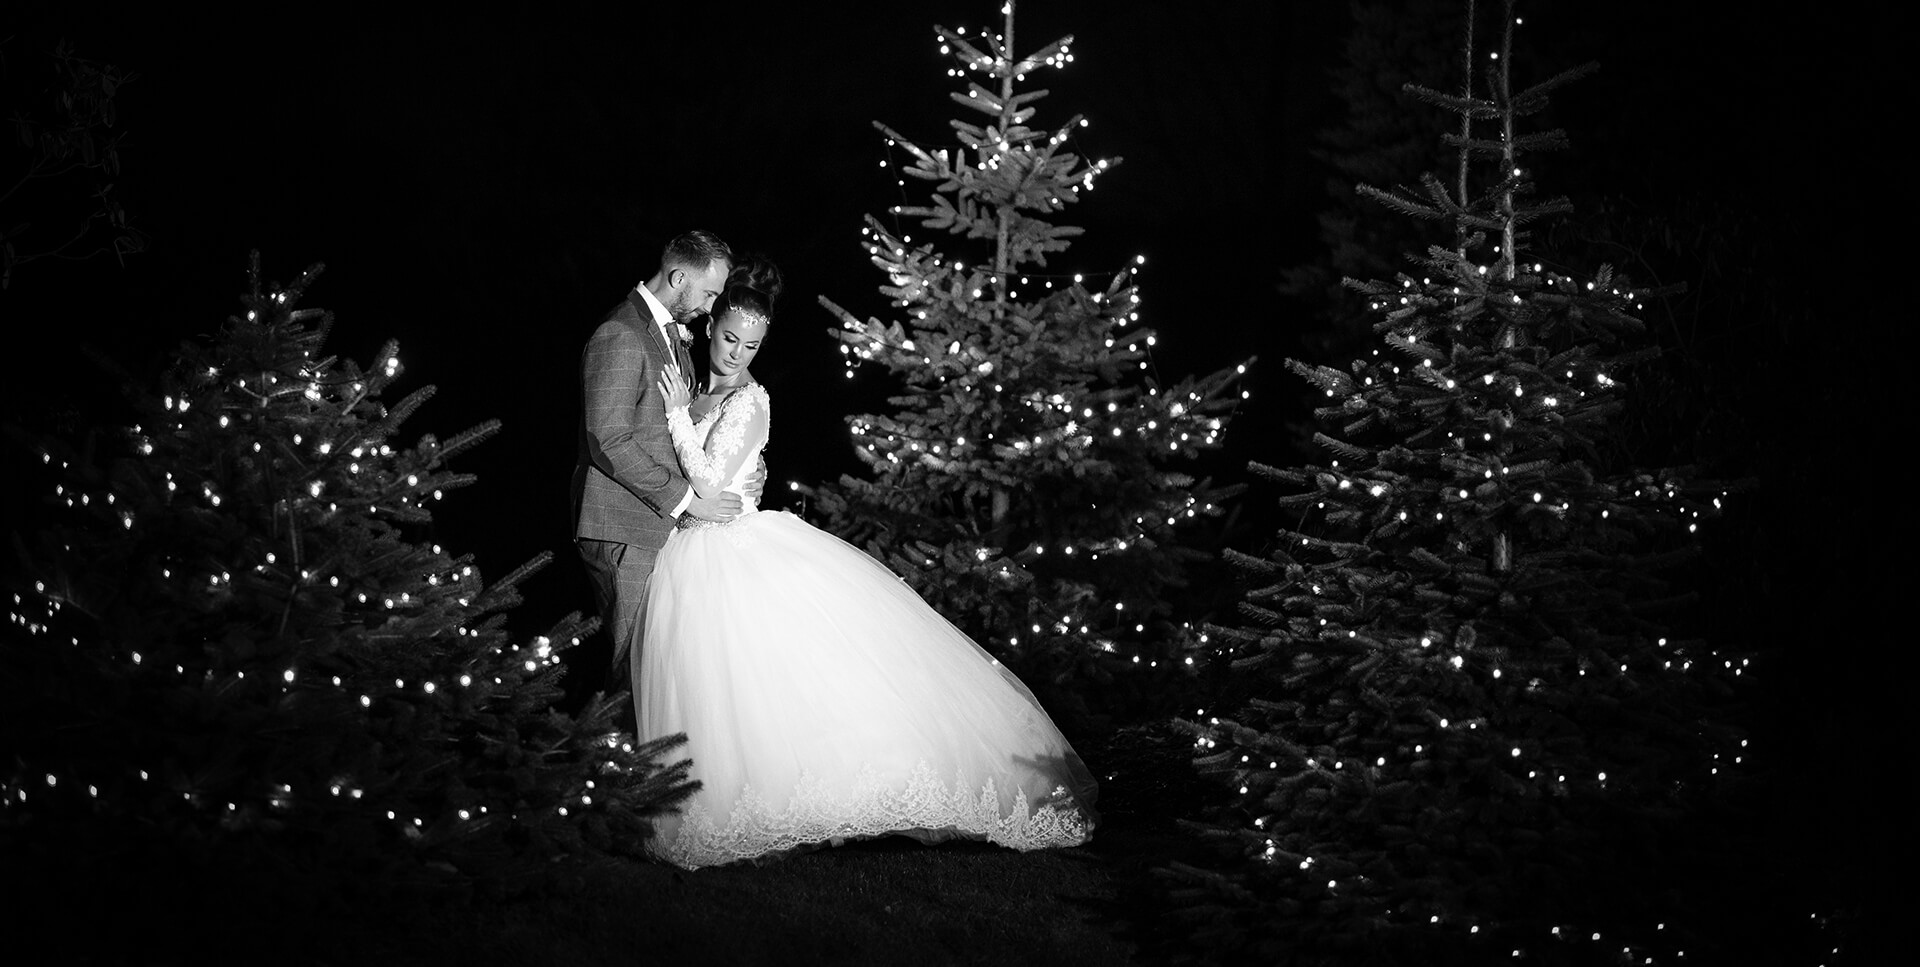 The bride and groom posed between Christmas trees for their winter themed evening reception